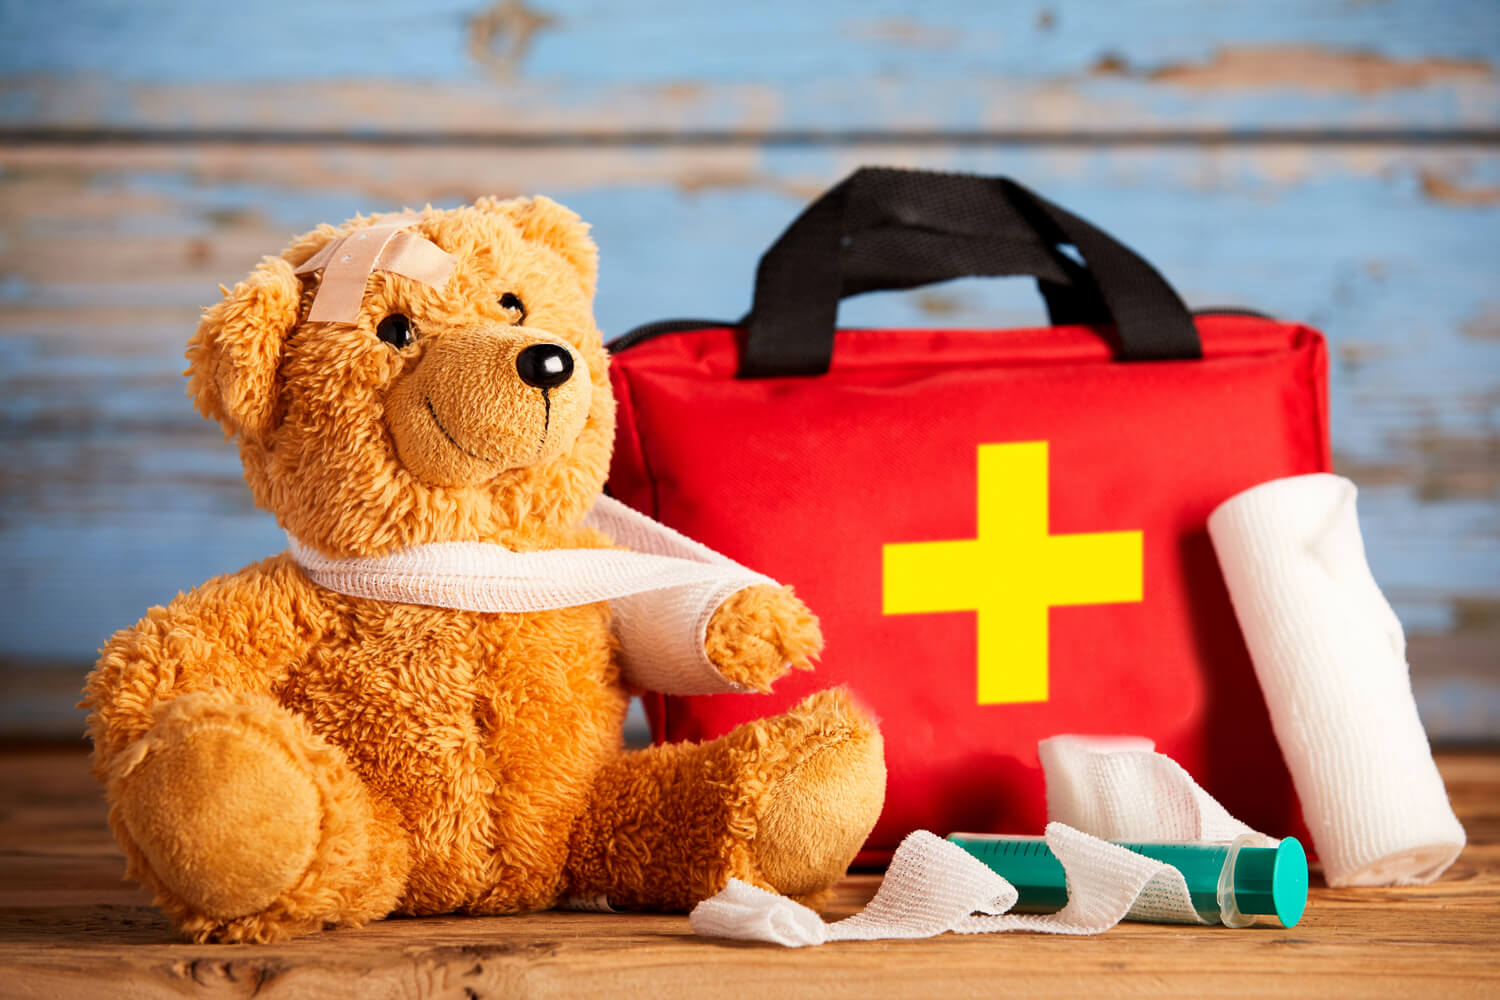 first aid kit for babies